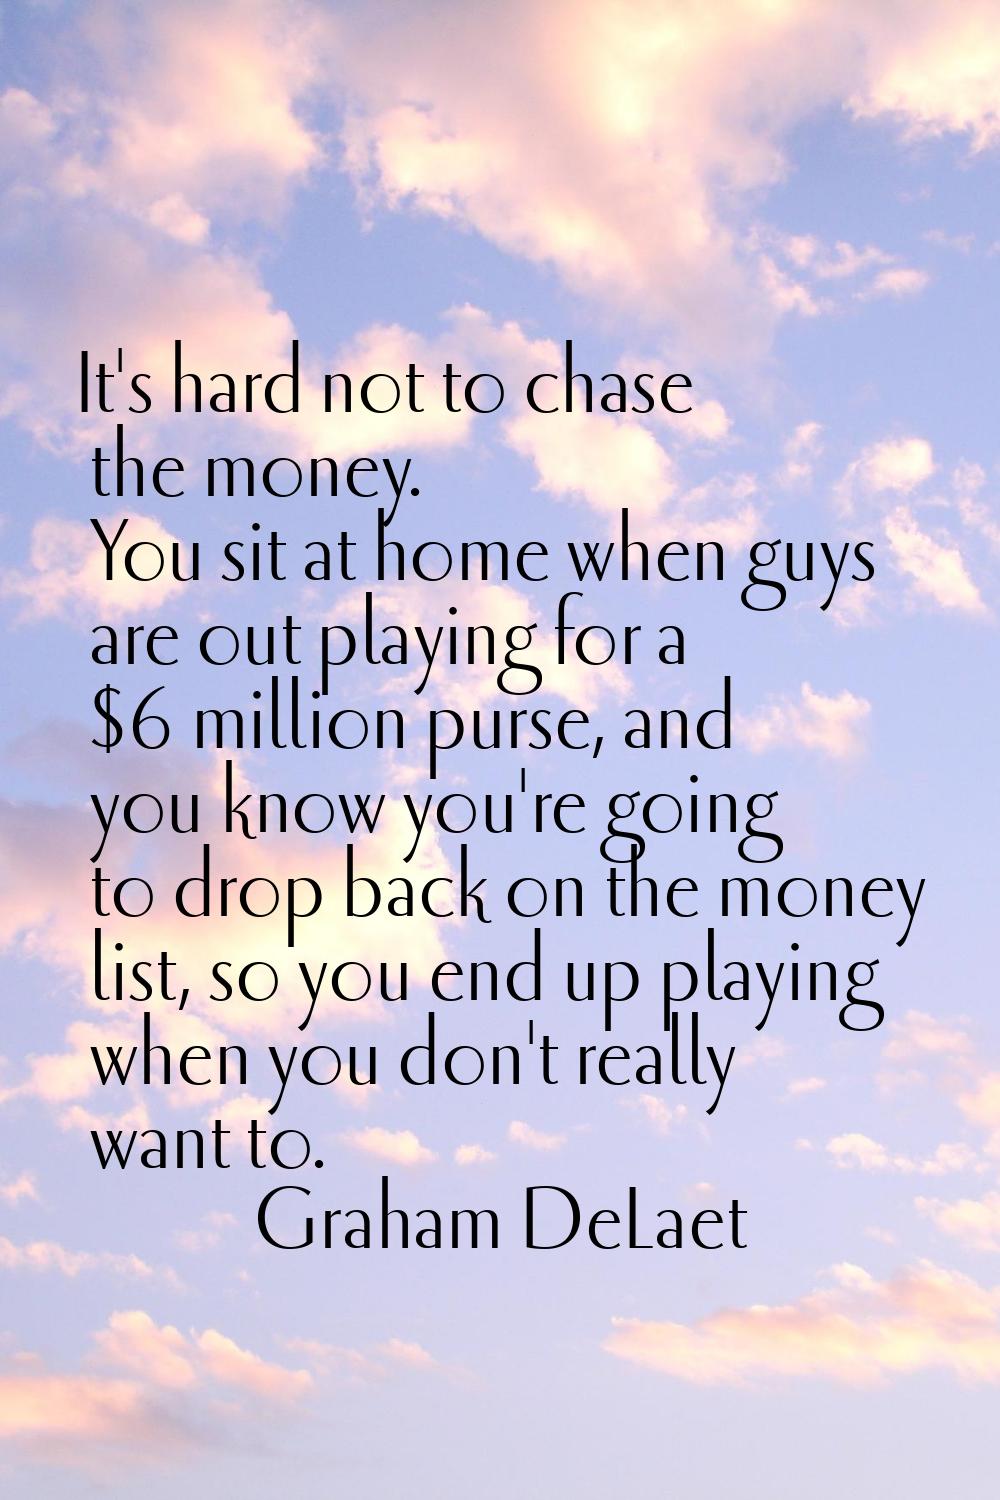 It's hard not to chase the money. You sit at home when guys are out playing for a $6 million purse,